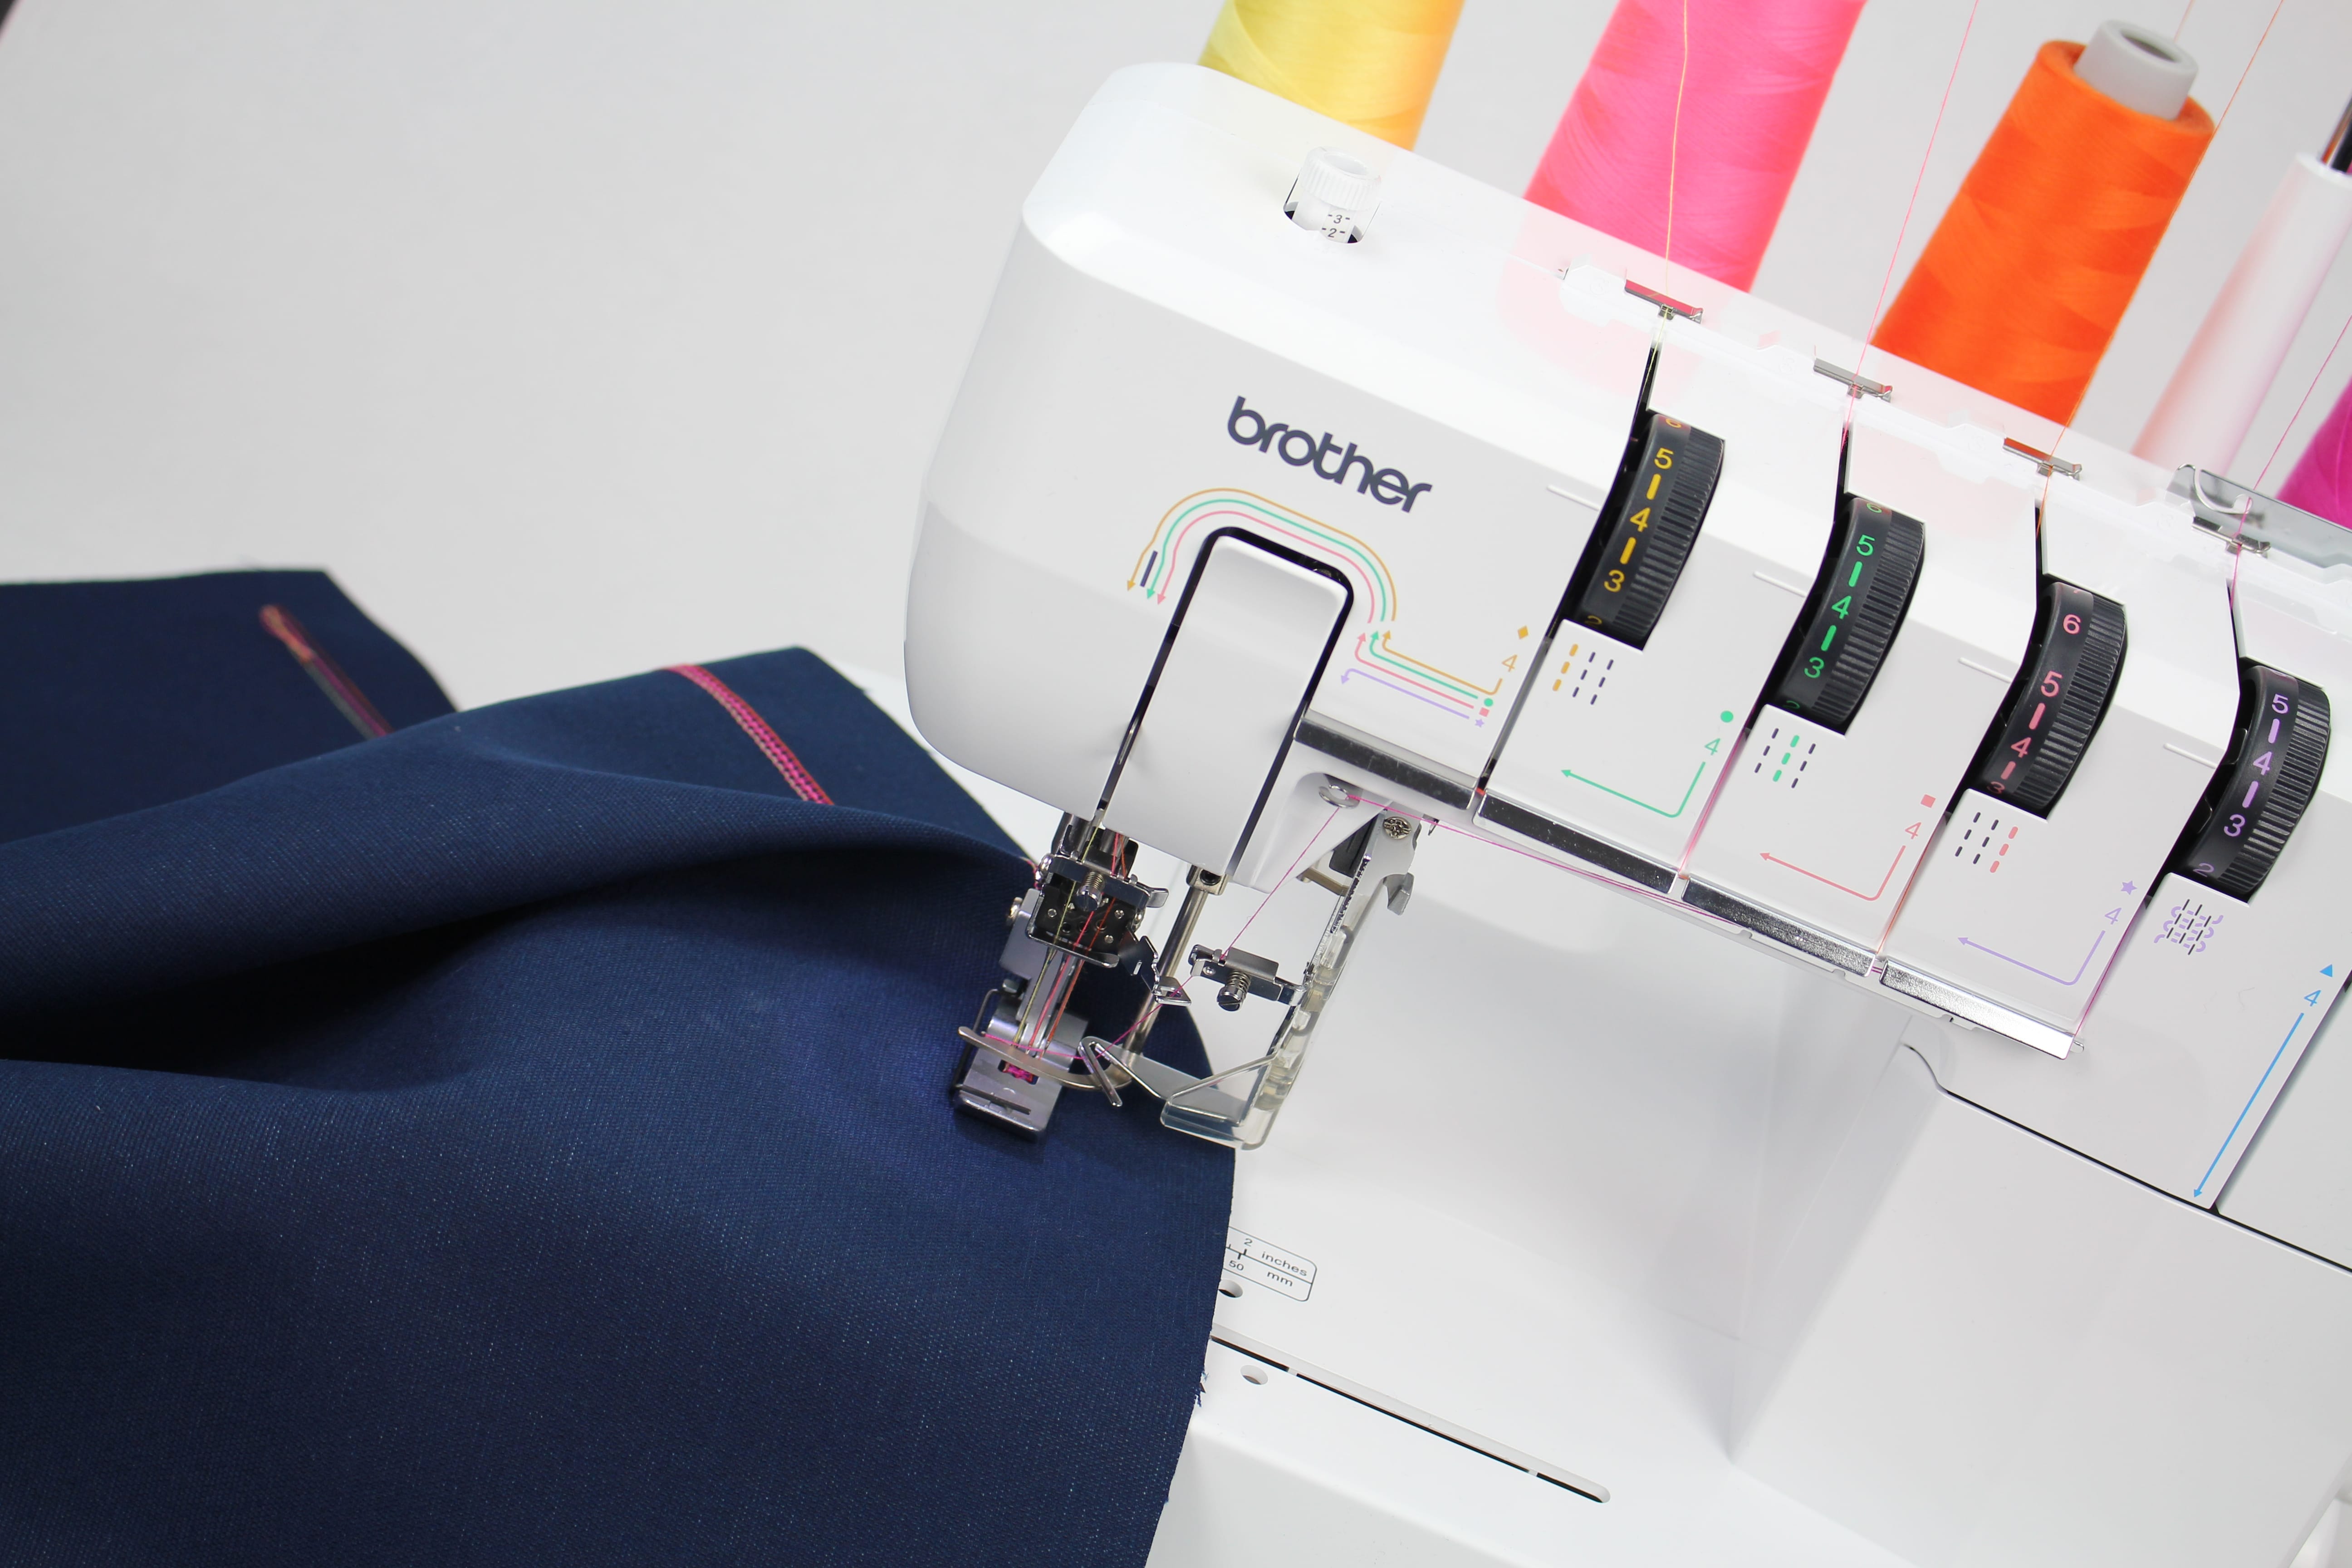 How To Use A Coverstitch Machine: Cover Stitch Basics - Melly Sews